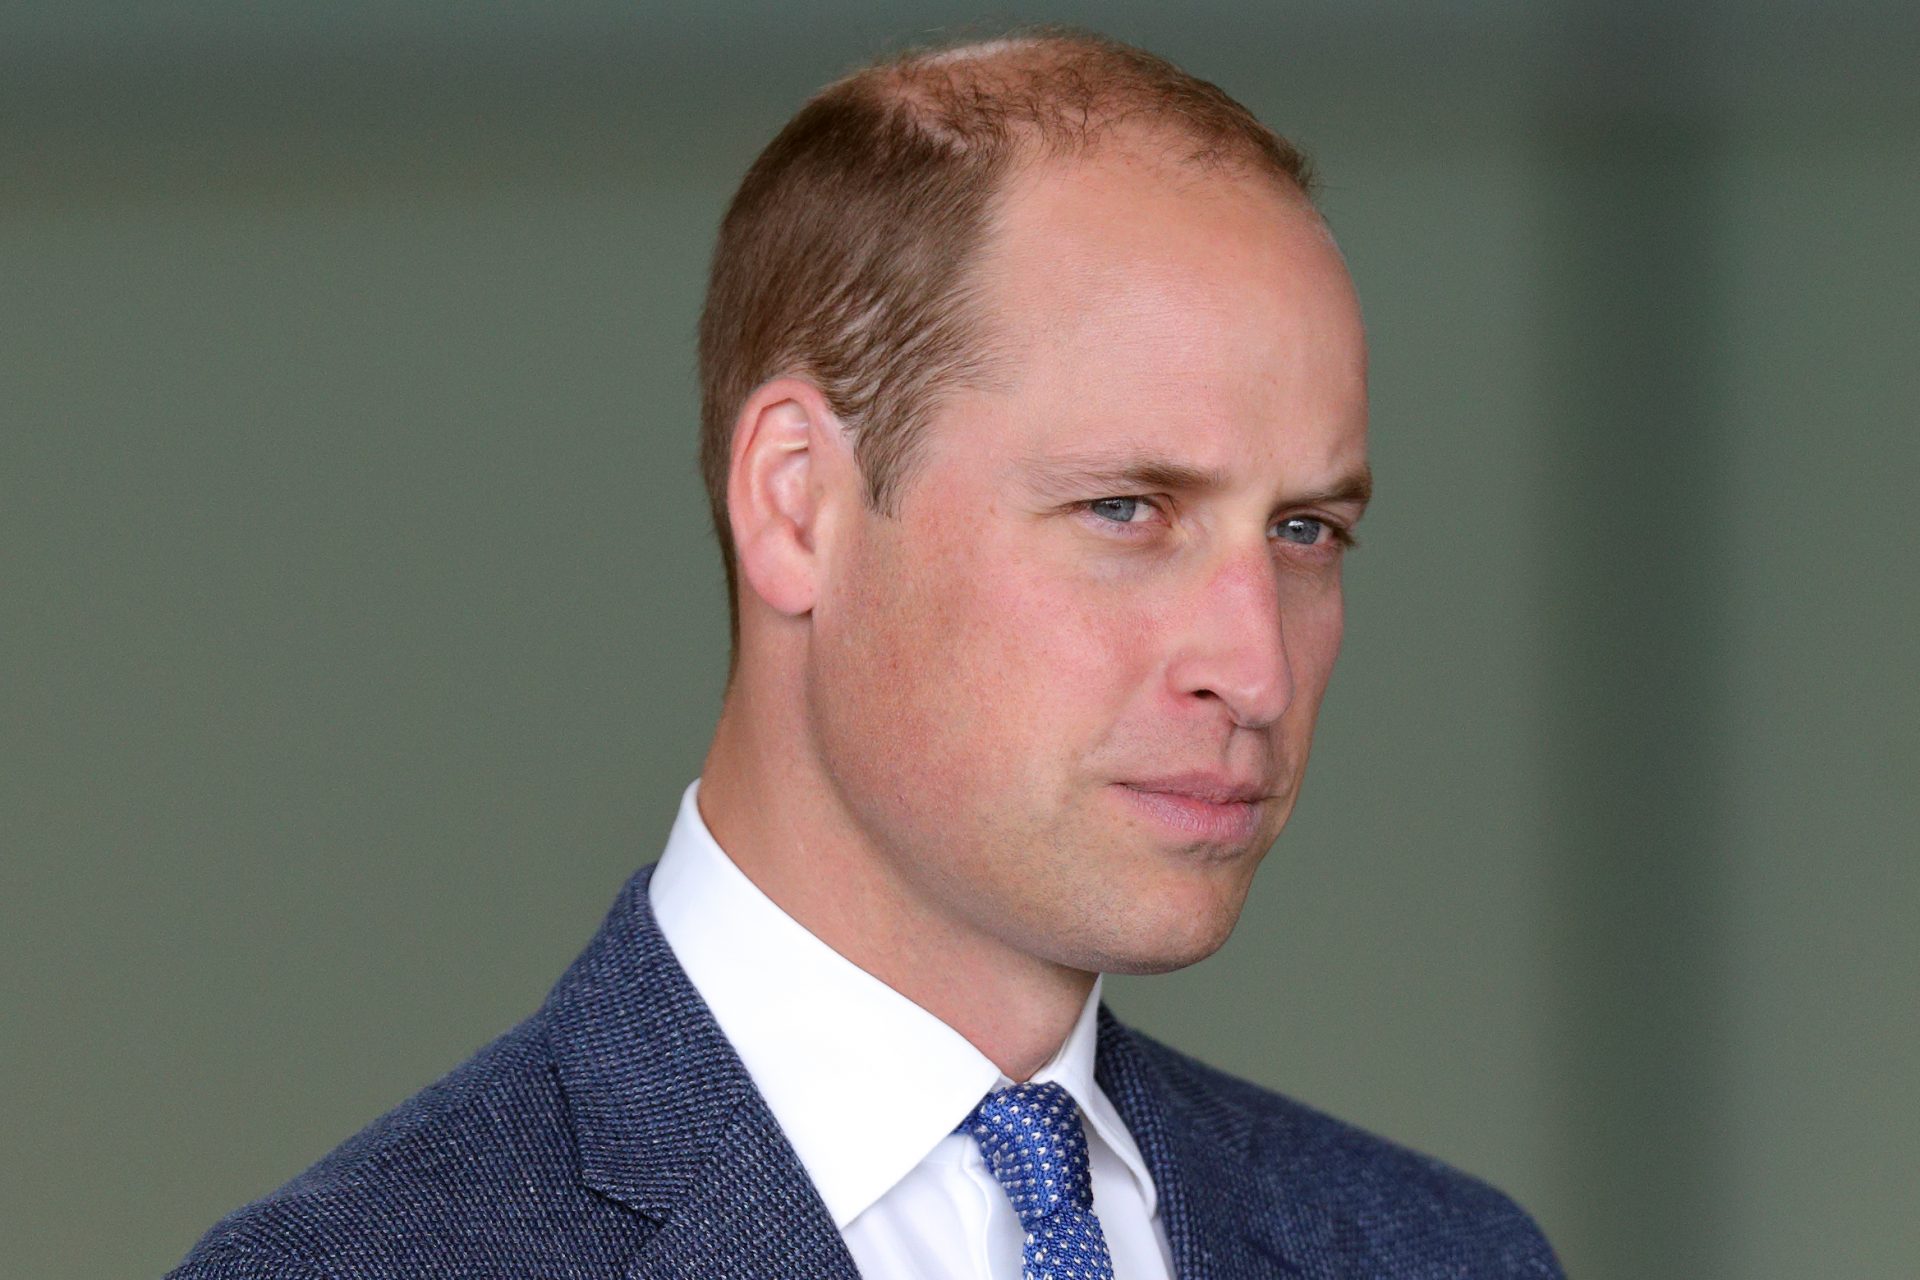 So what happened to Prince William?